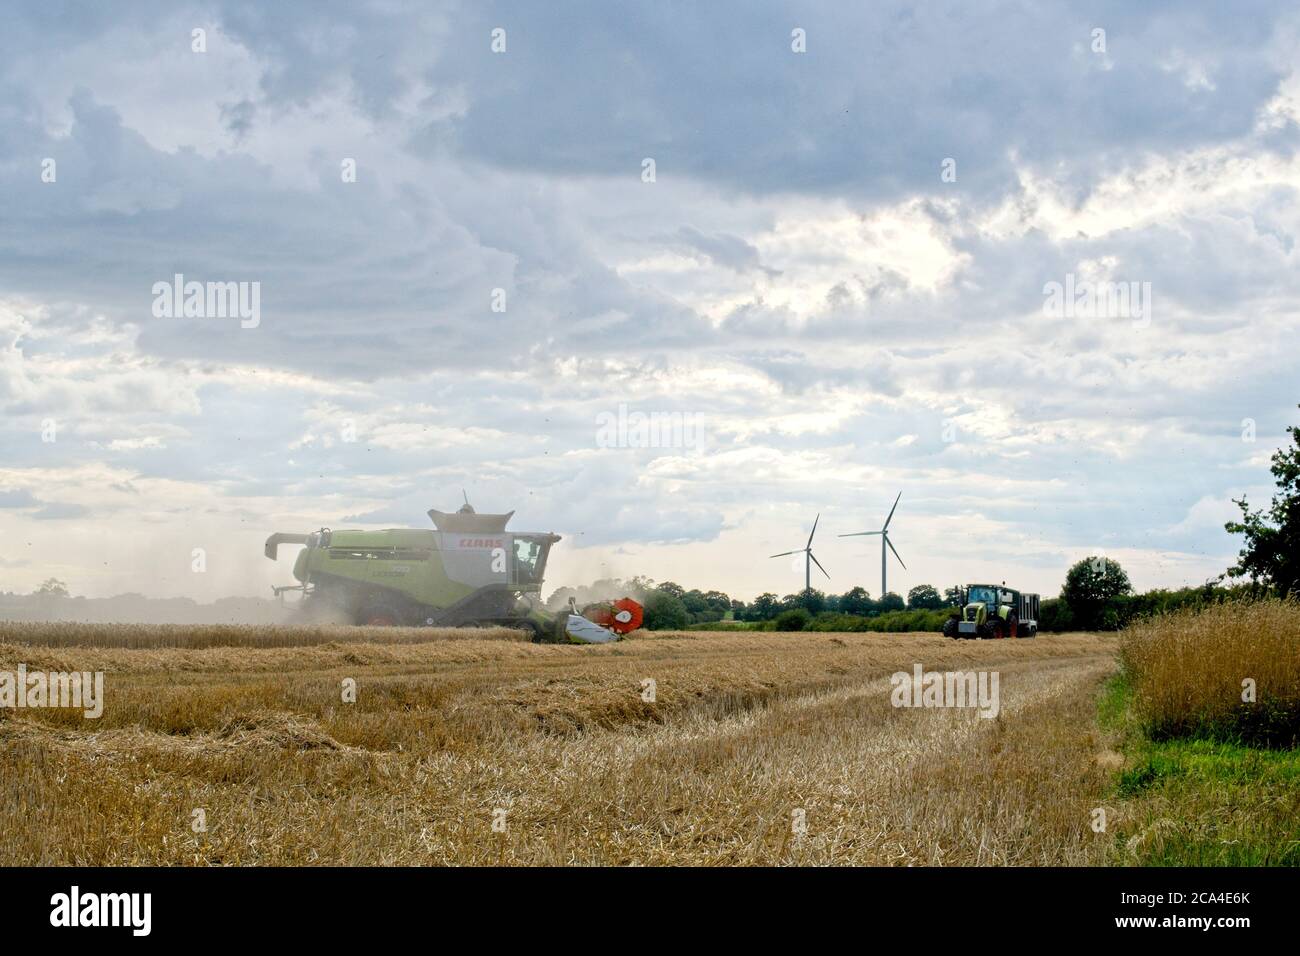 Winter Harvest Middle distance side on view of harvester moving left to right Crop and stubble in field Wind turbines in distance Cloudy sky Stock Photo